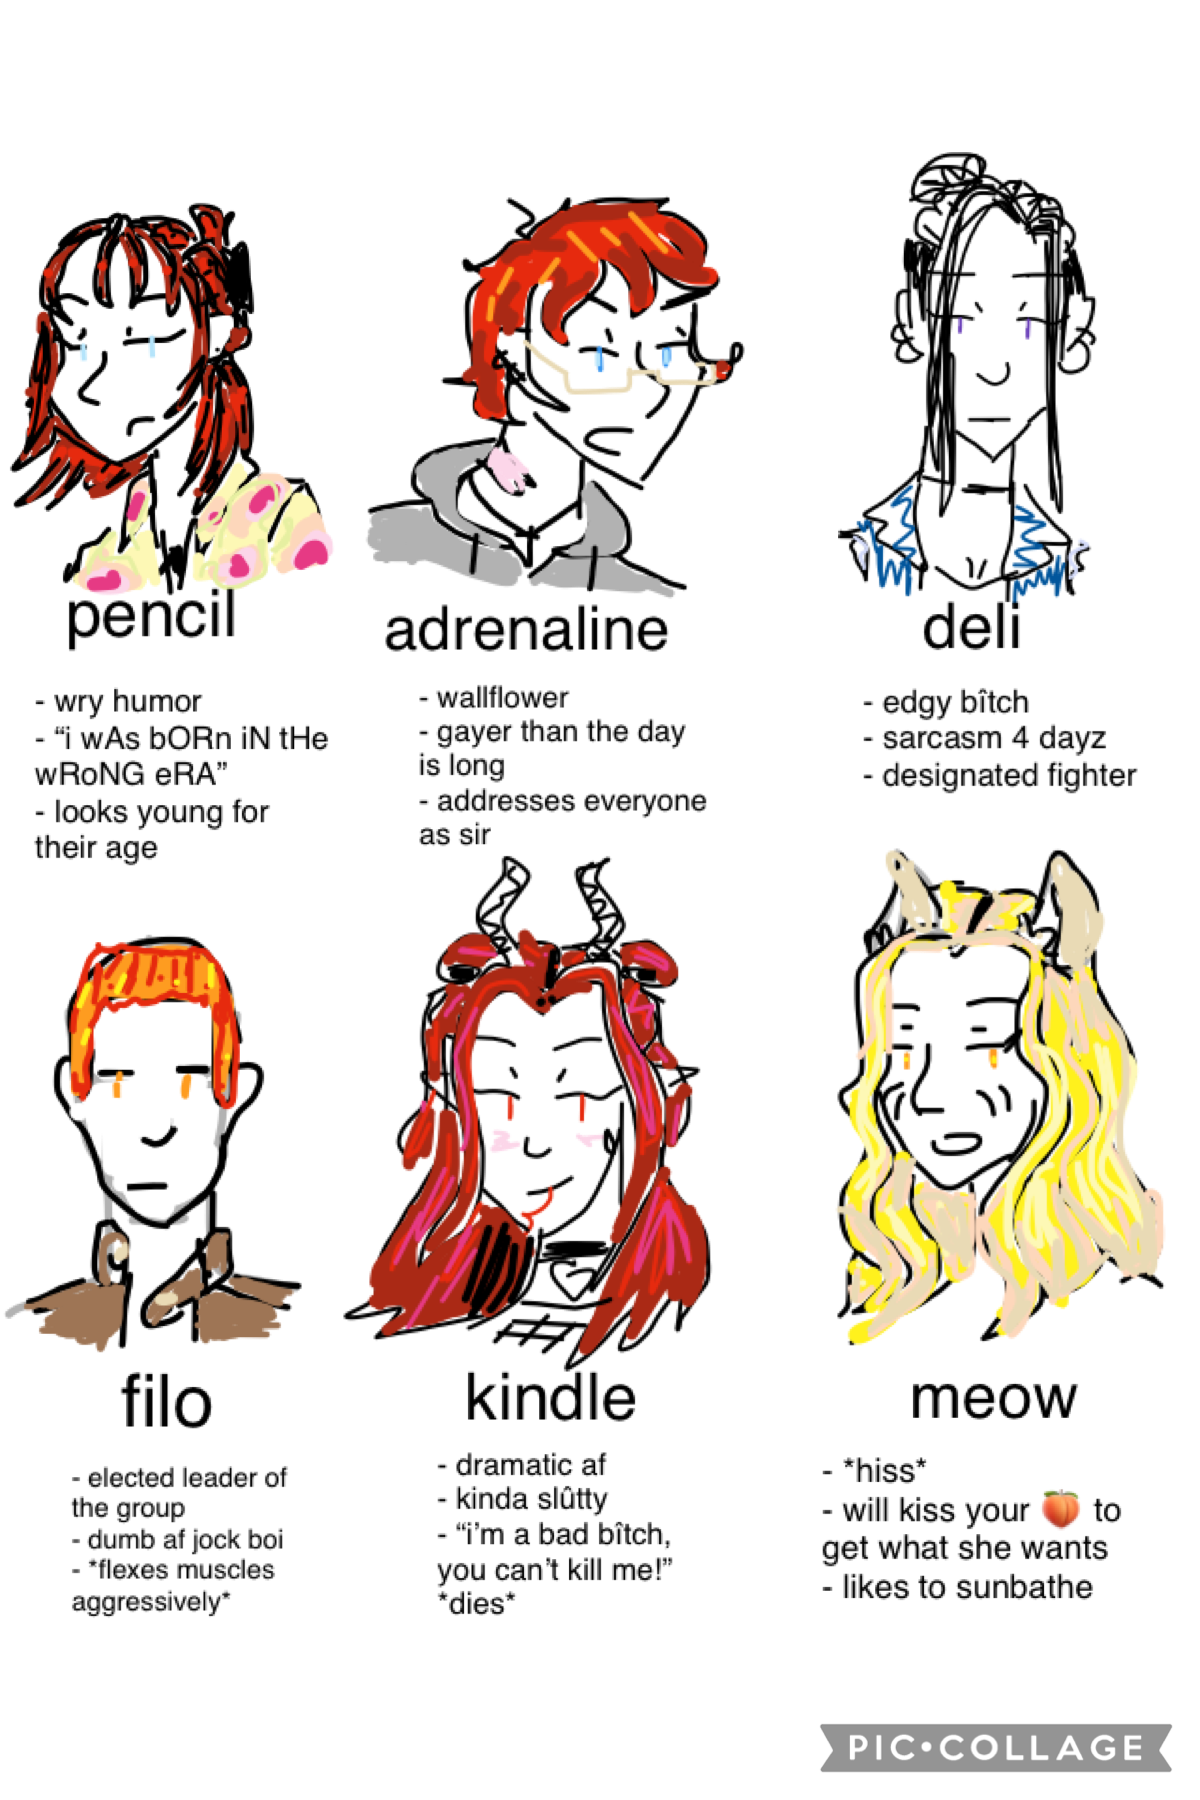 tag yourself: fall of angelis arc edition (tap)

pencil=penelope, adrenaline=adrien, deli=del, filo=milo, kindle=kynna, meow=elaina. I never talk about this arc so here are the main characters lol. also I really need someone to talk about wandavision with